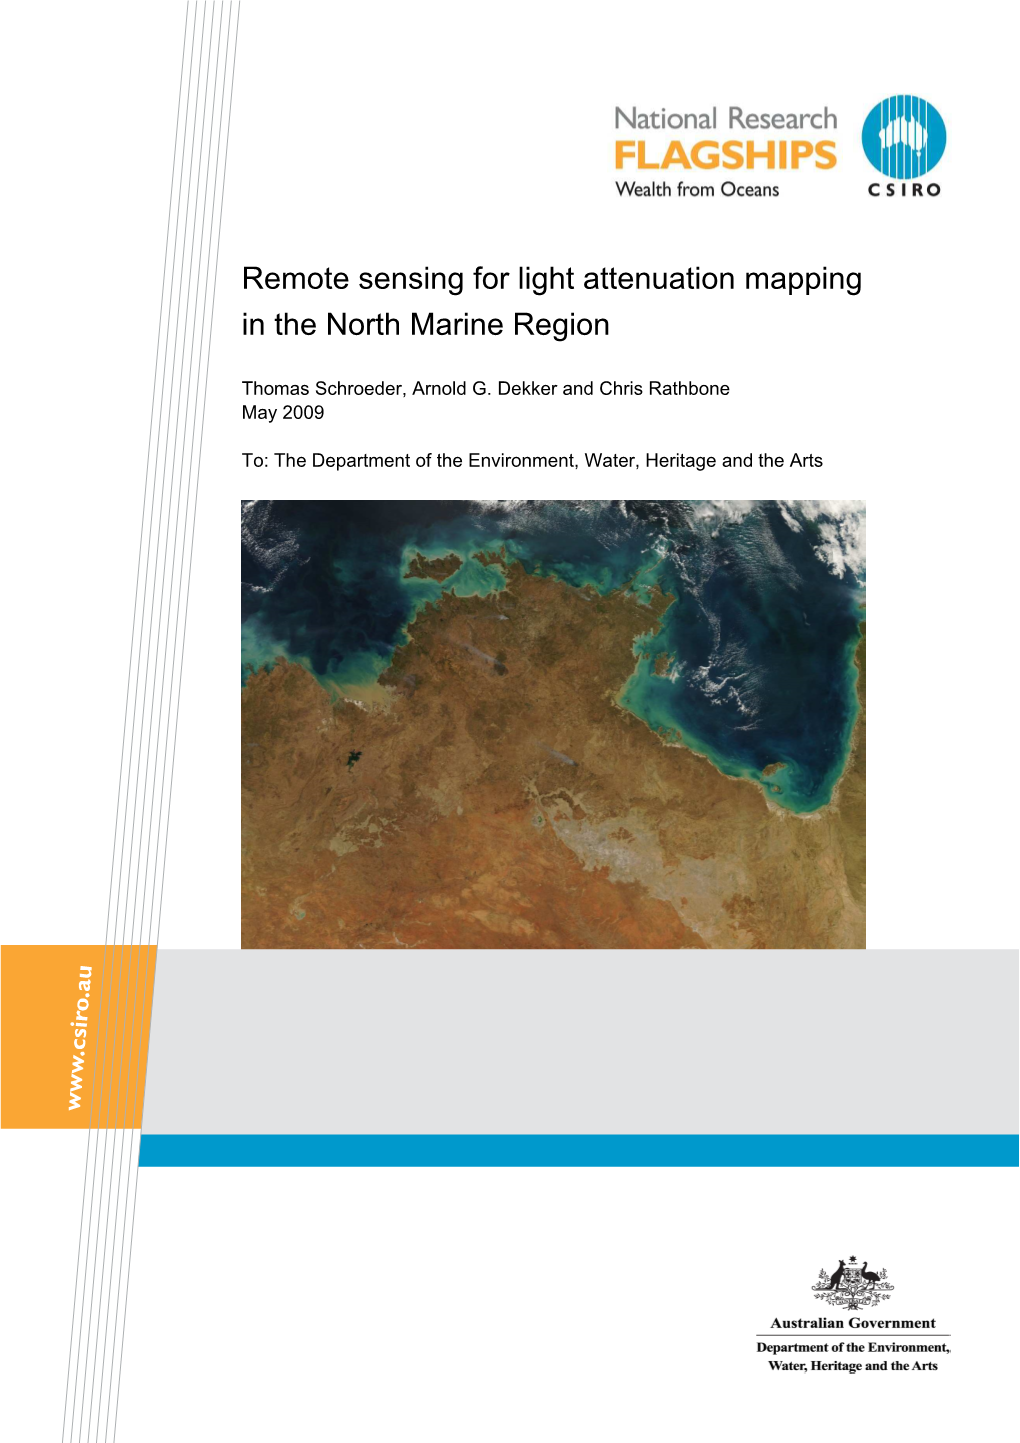 Remote Sensing for Light Attenuation Mapping in the North Marine Region